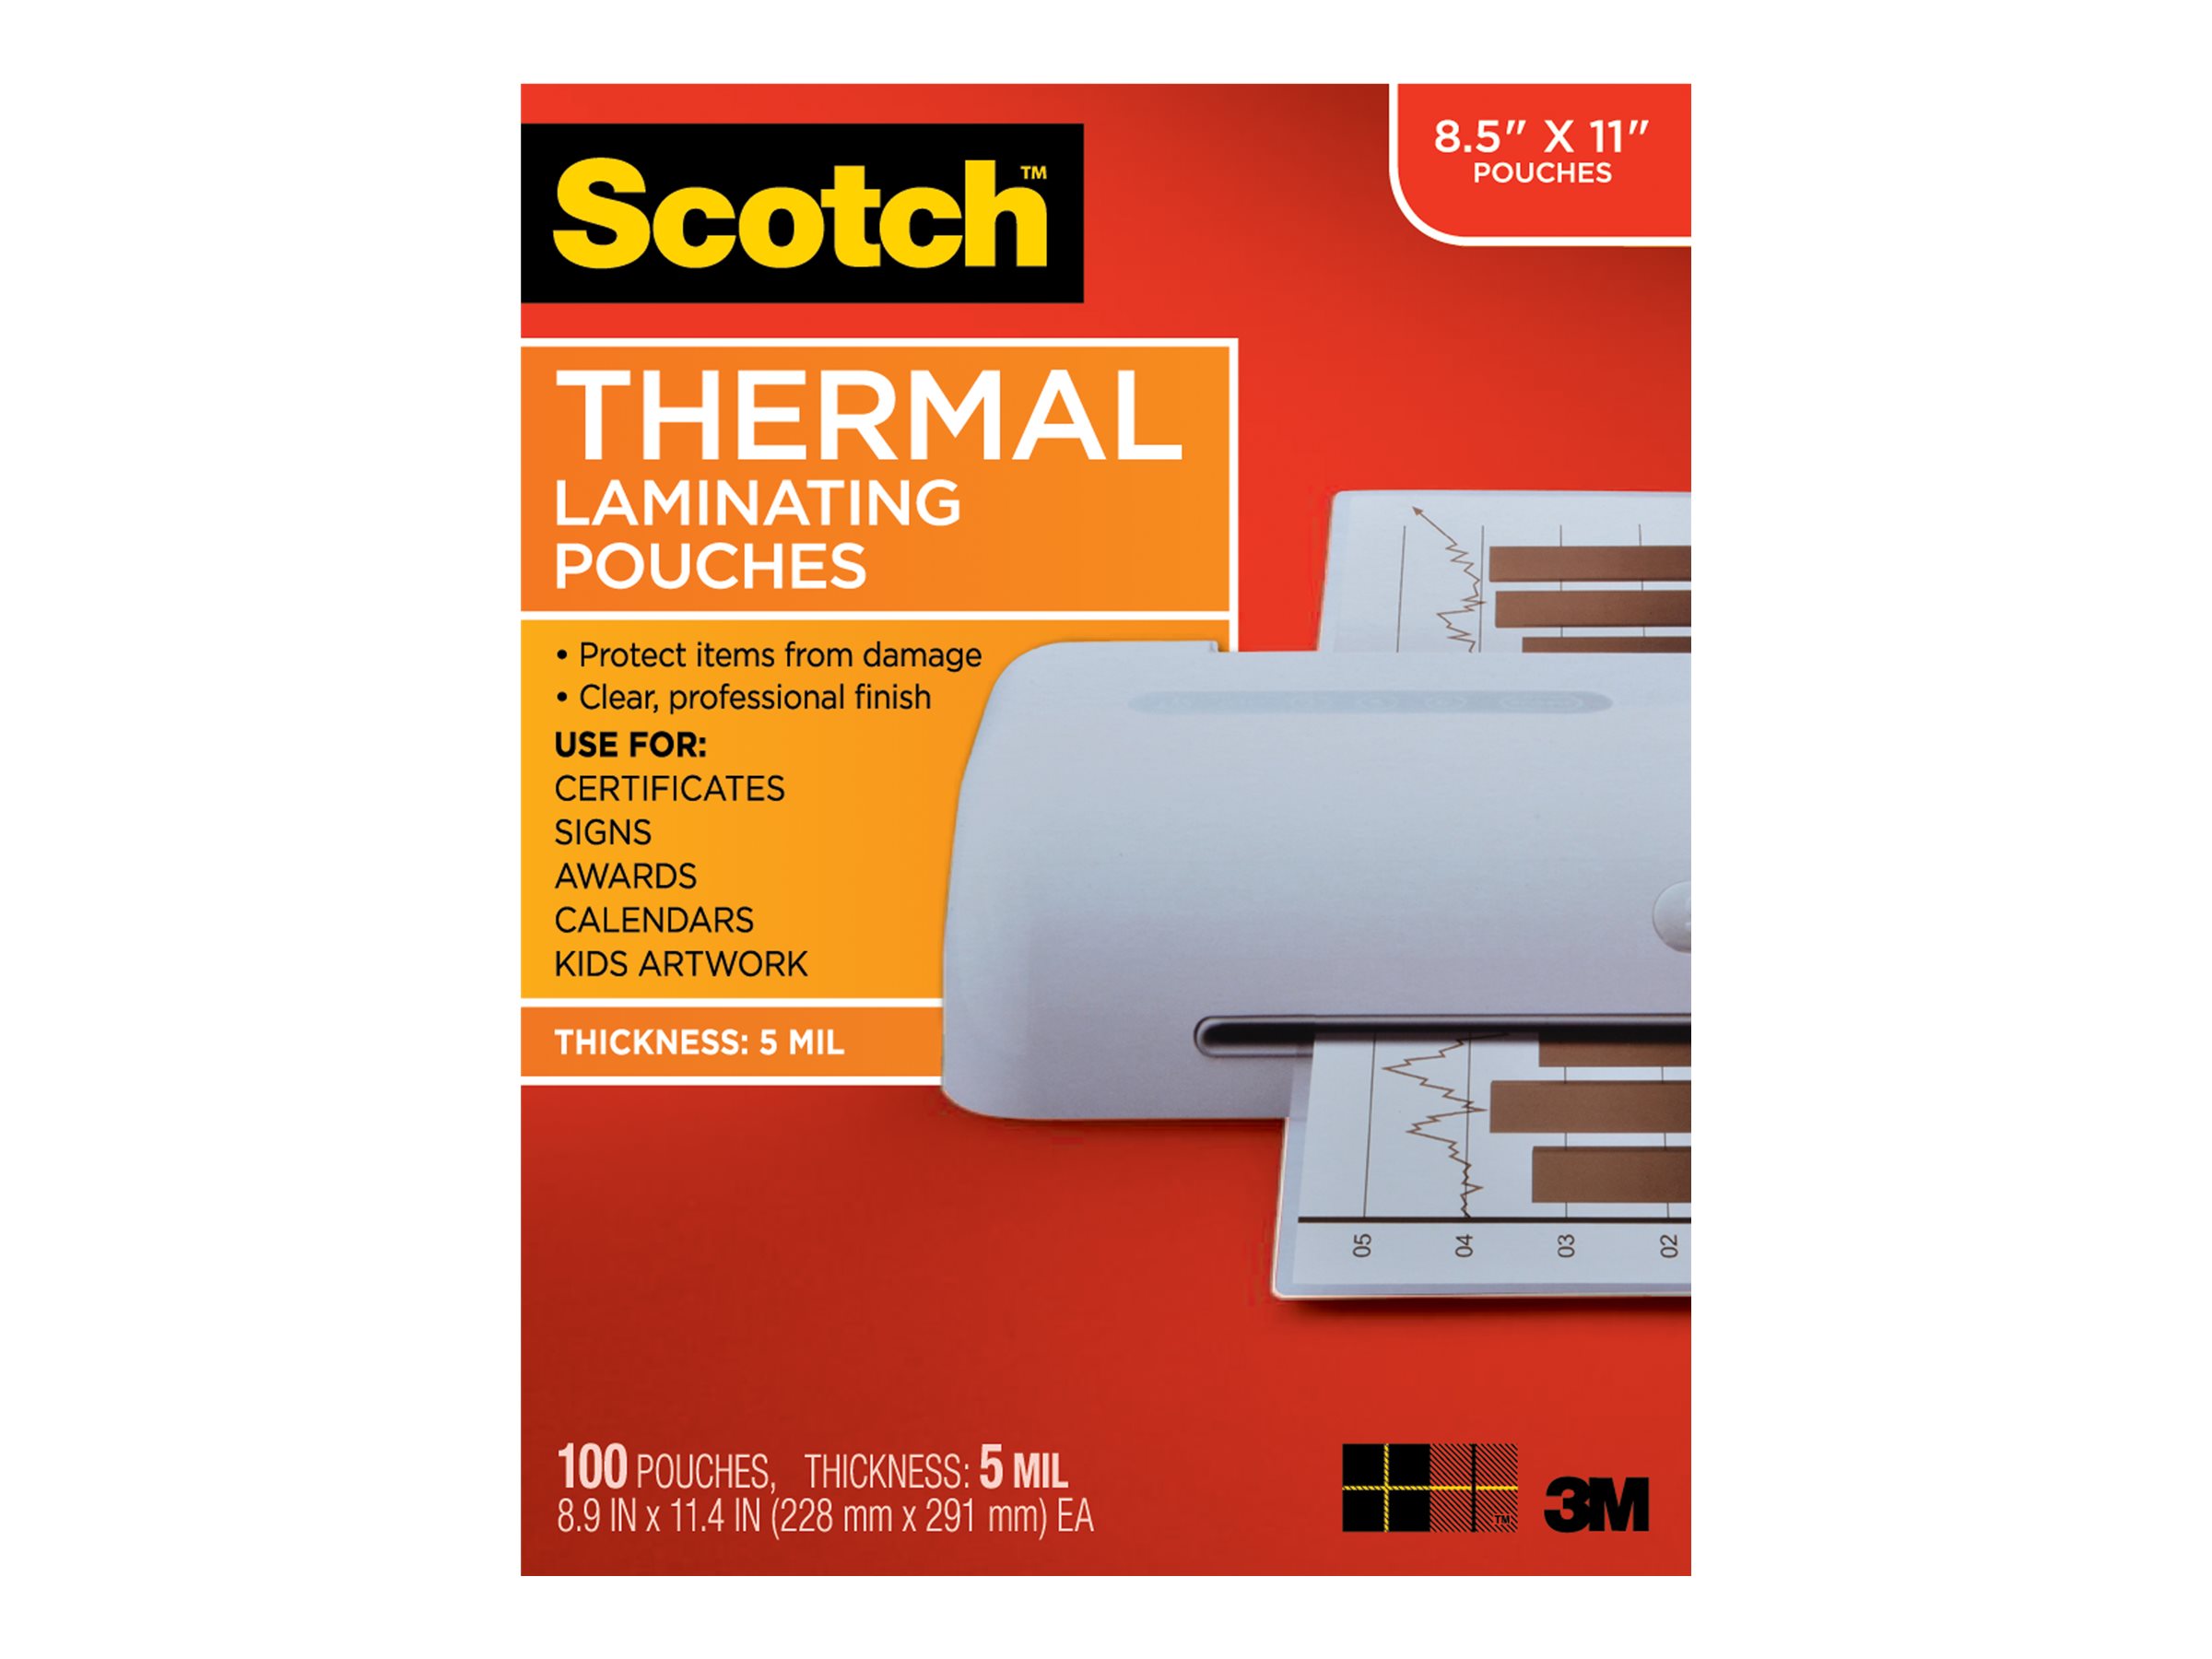 THERMAL POUCHES 8.9 IN X 11.4 IN | www.shi.com